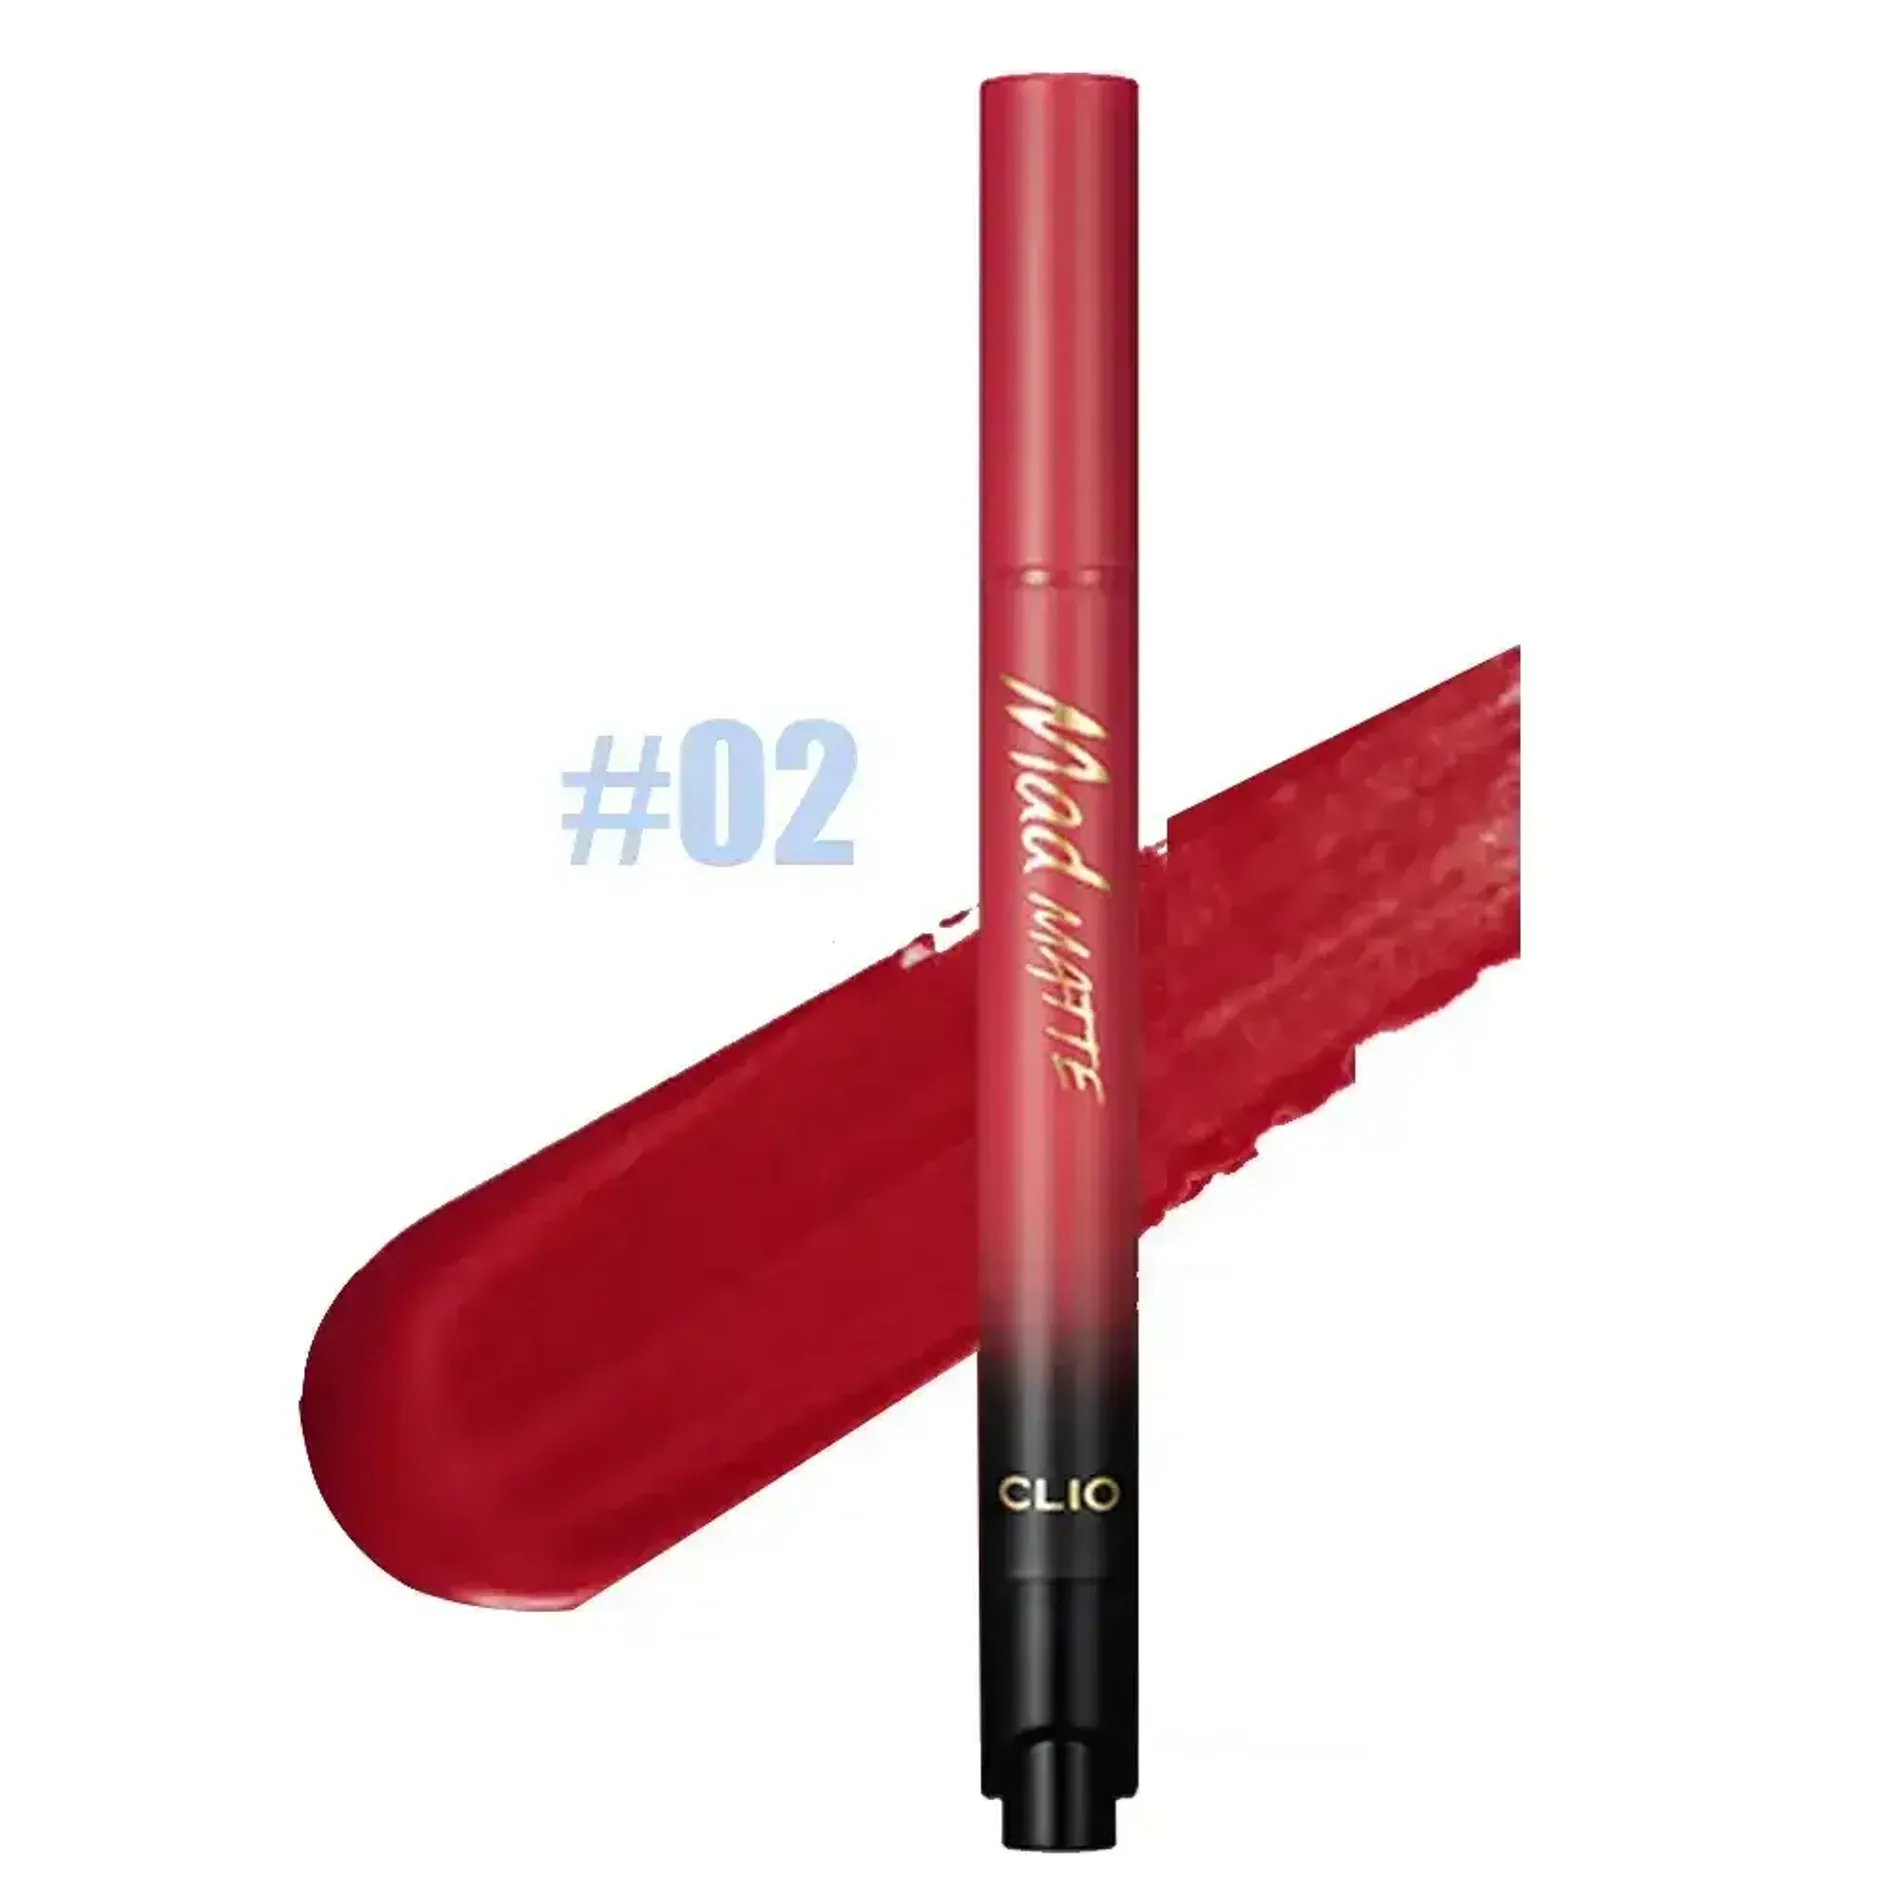 son-nuoc-dang-bam-clio-mad-matte-stain-tint-2g-4